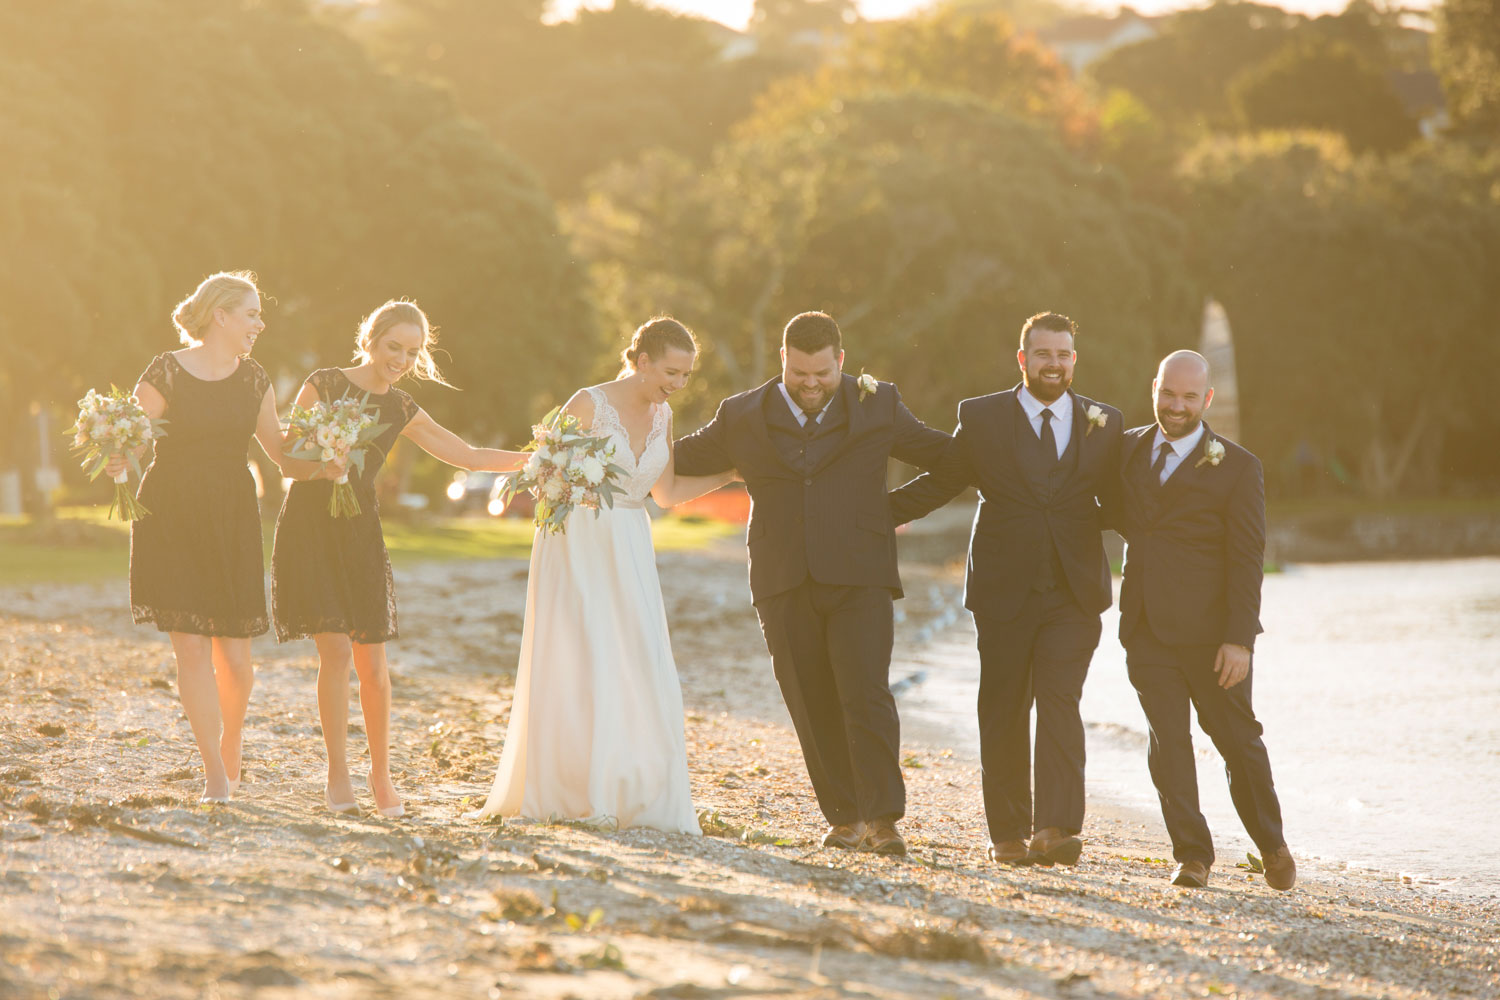 wedding photographer auckland bridal party strolling on sand